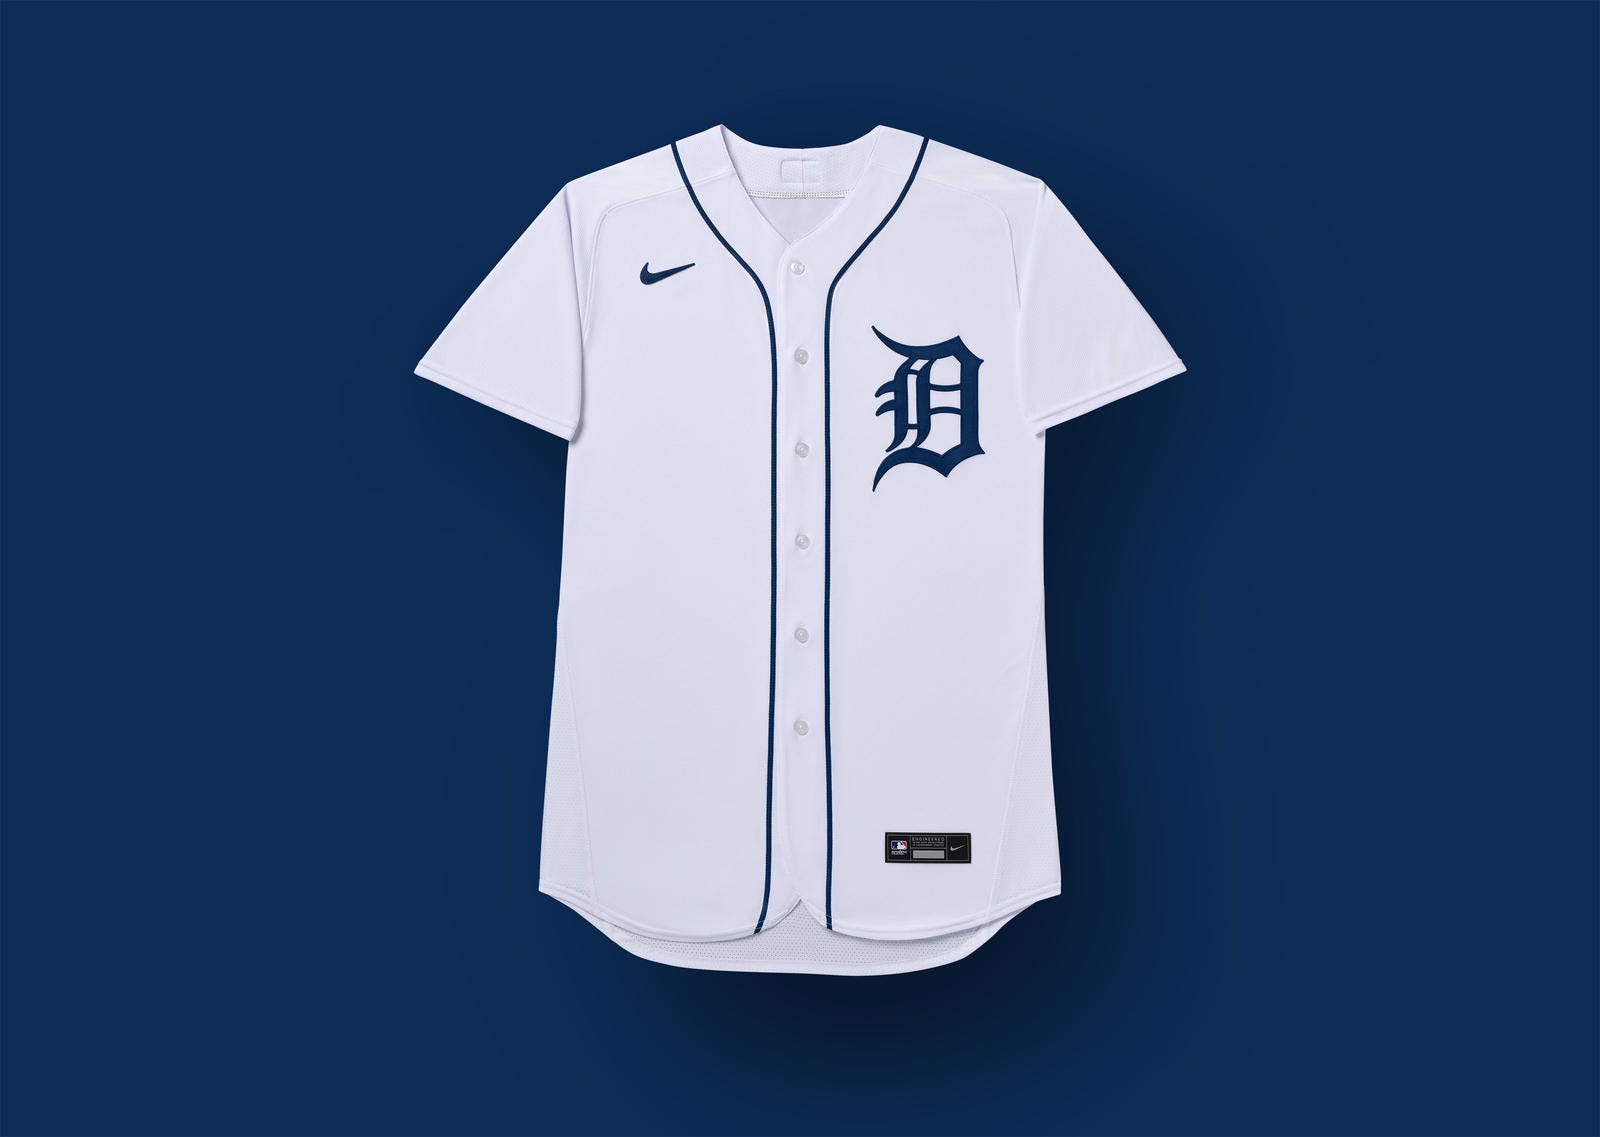 Detroit Tigers will have Nike swoosh on 